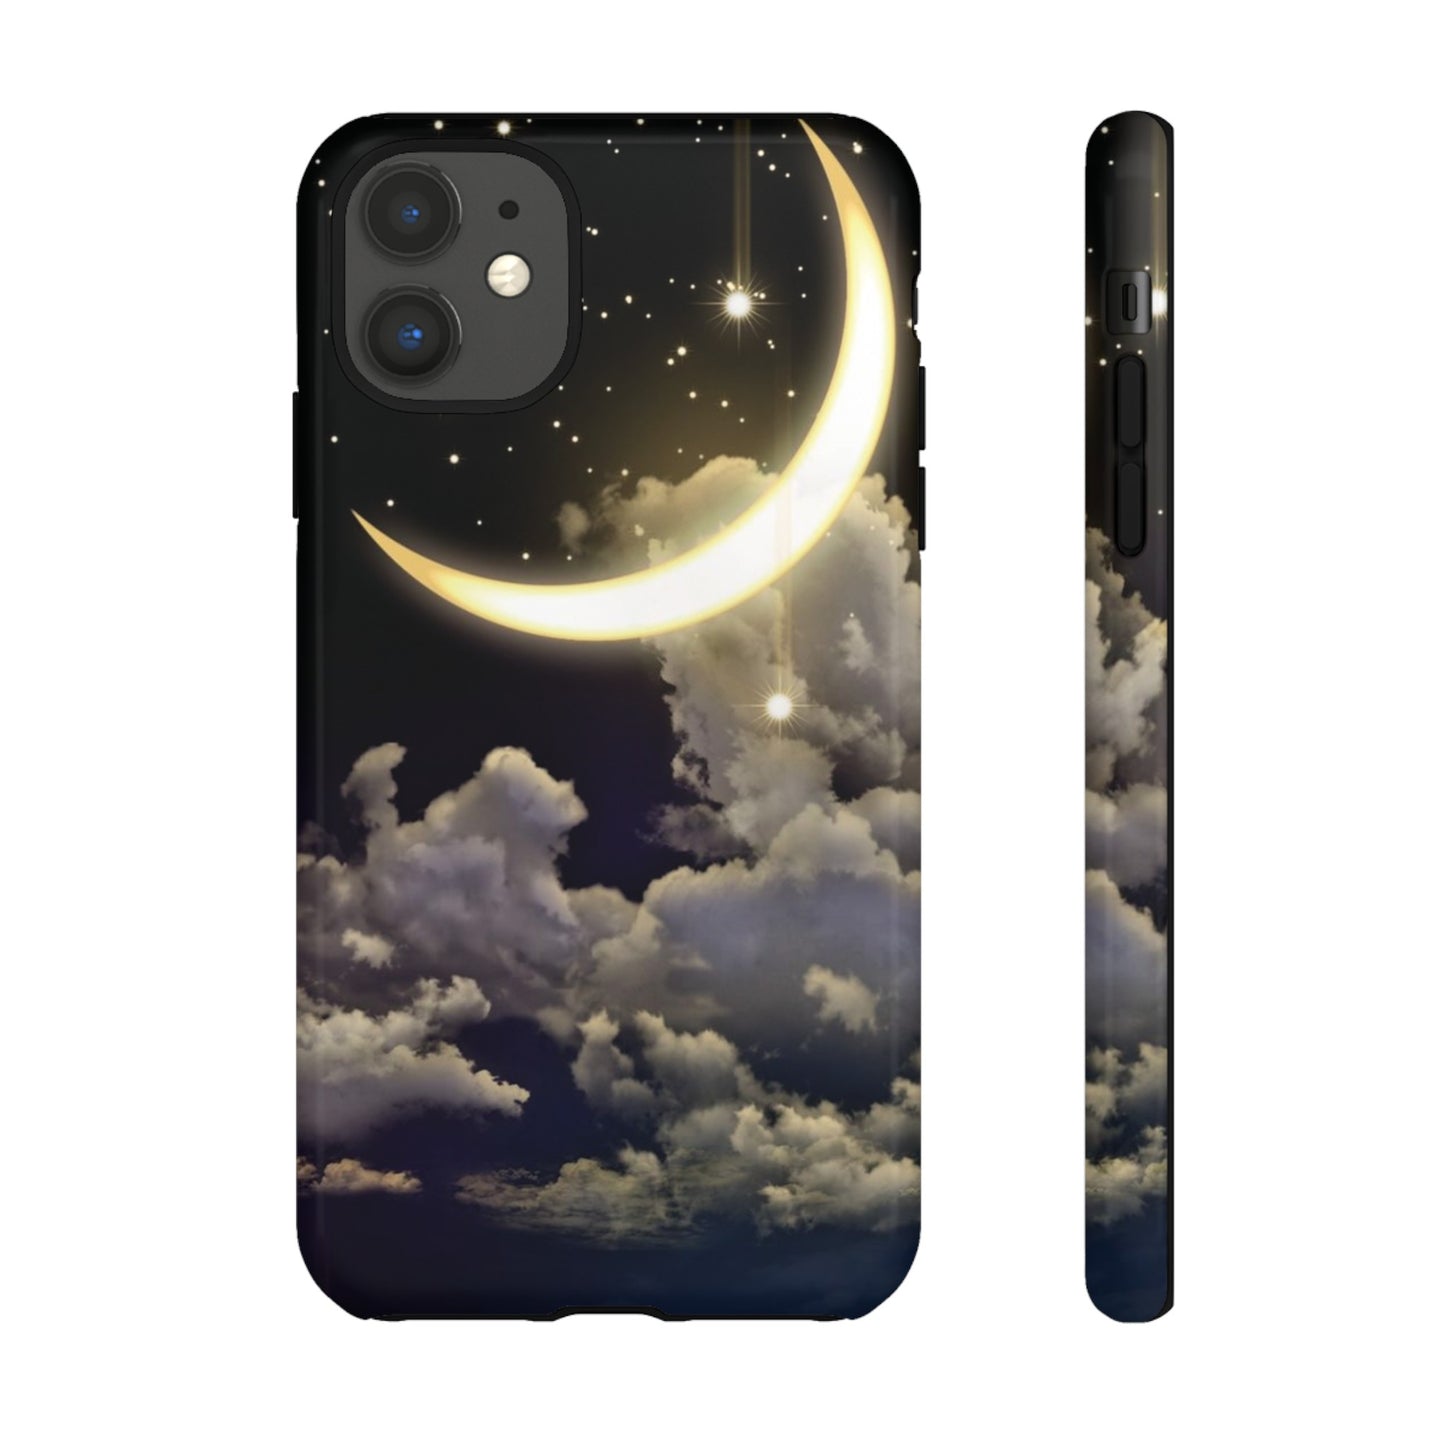 Moonlight Tough Cases - iPhone Cases